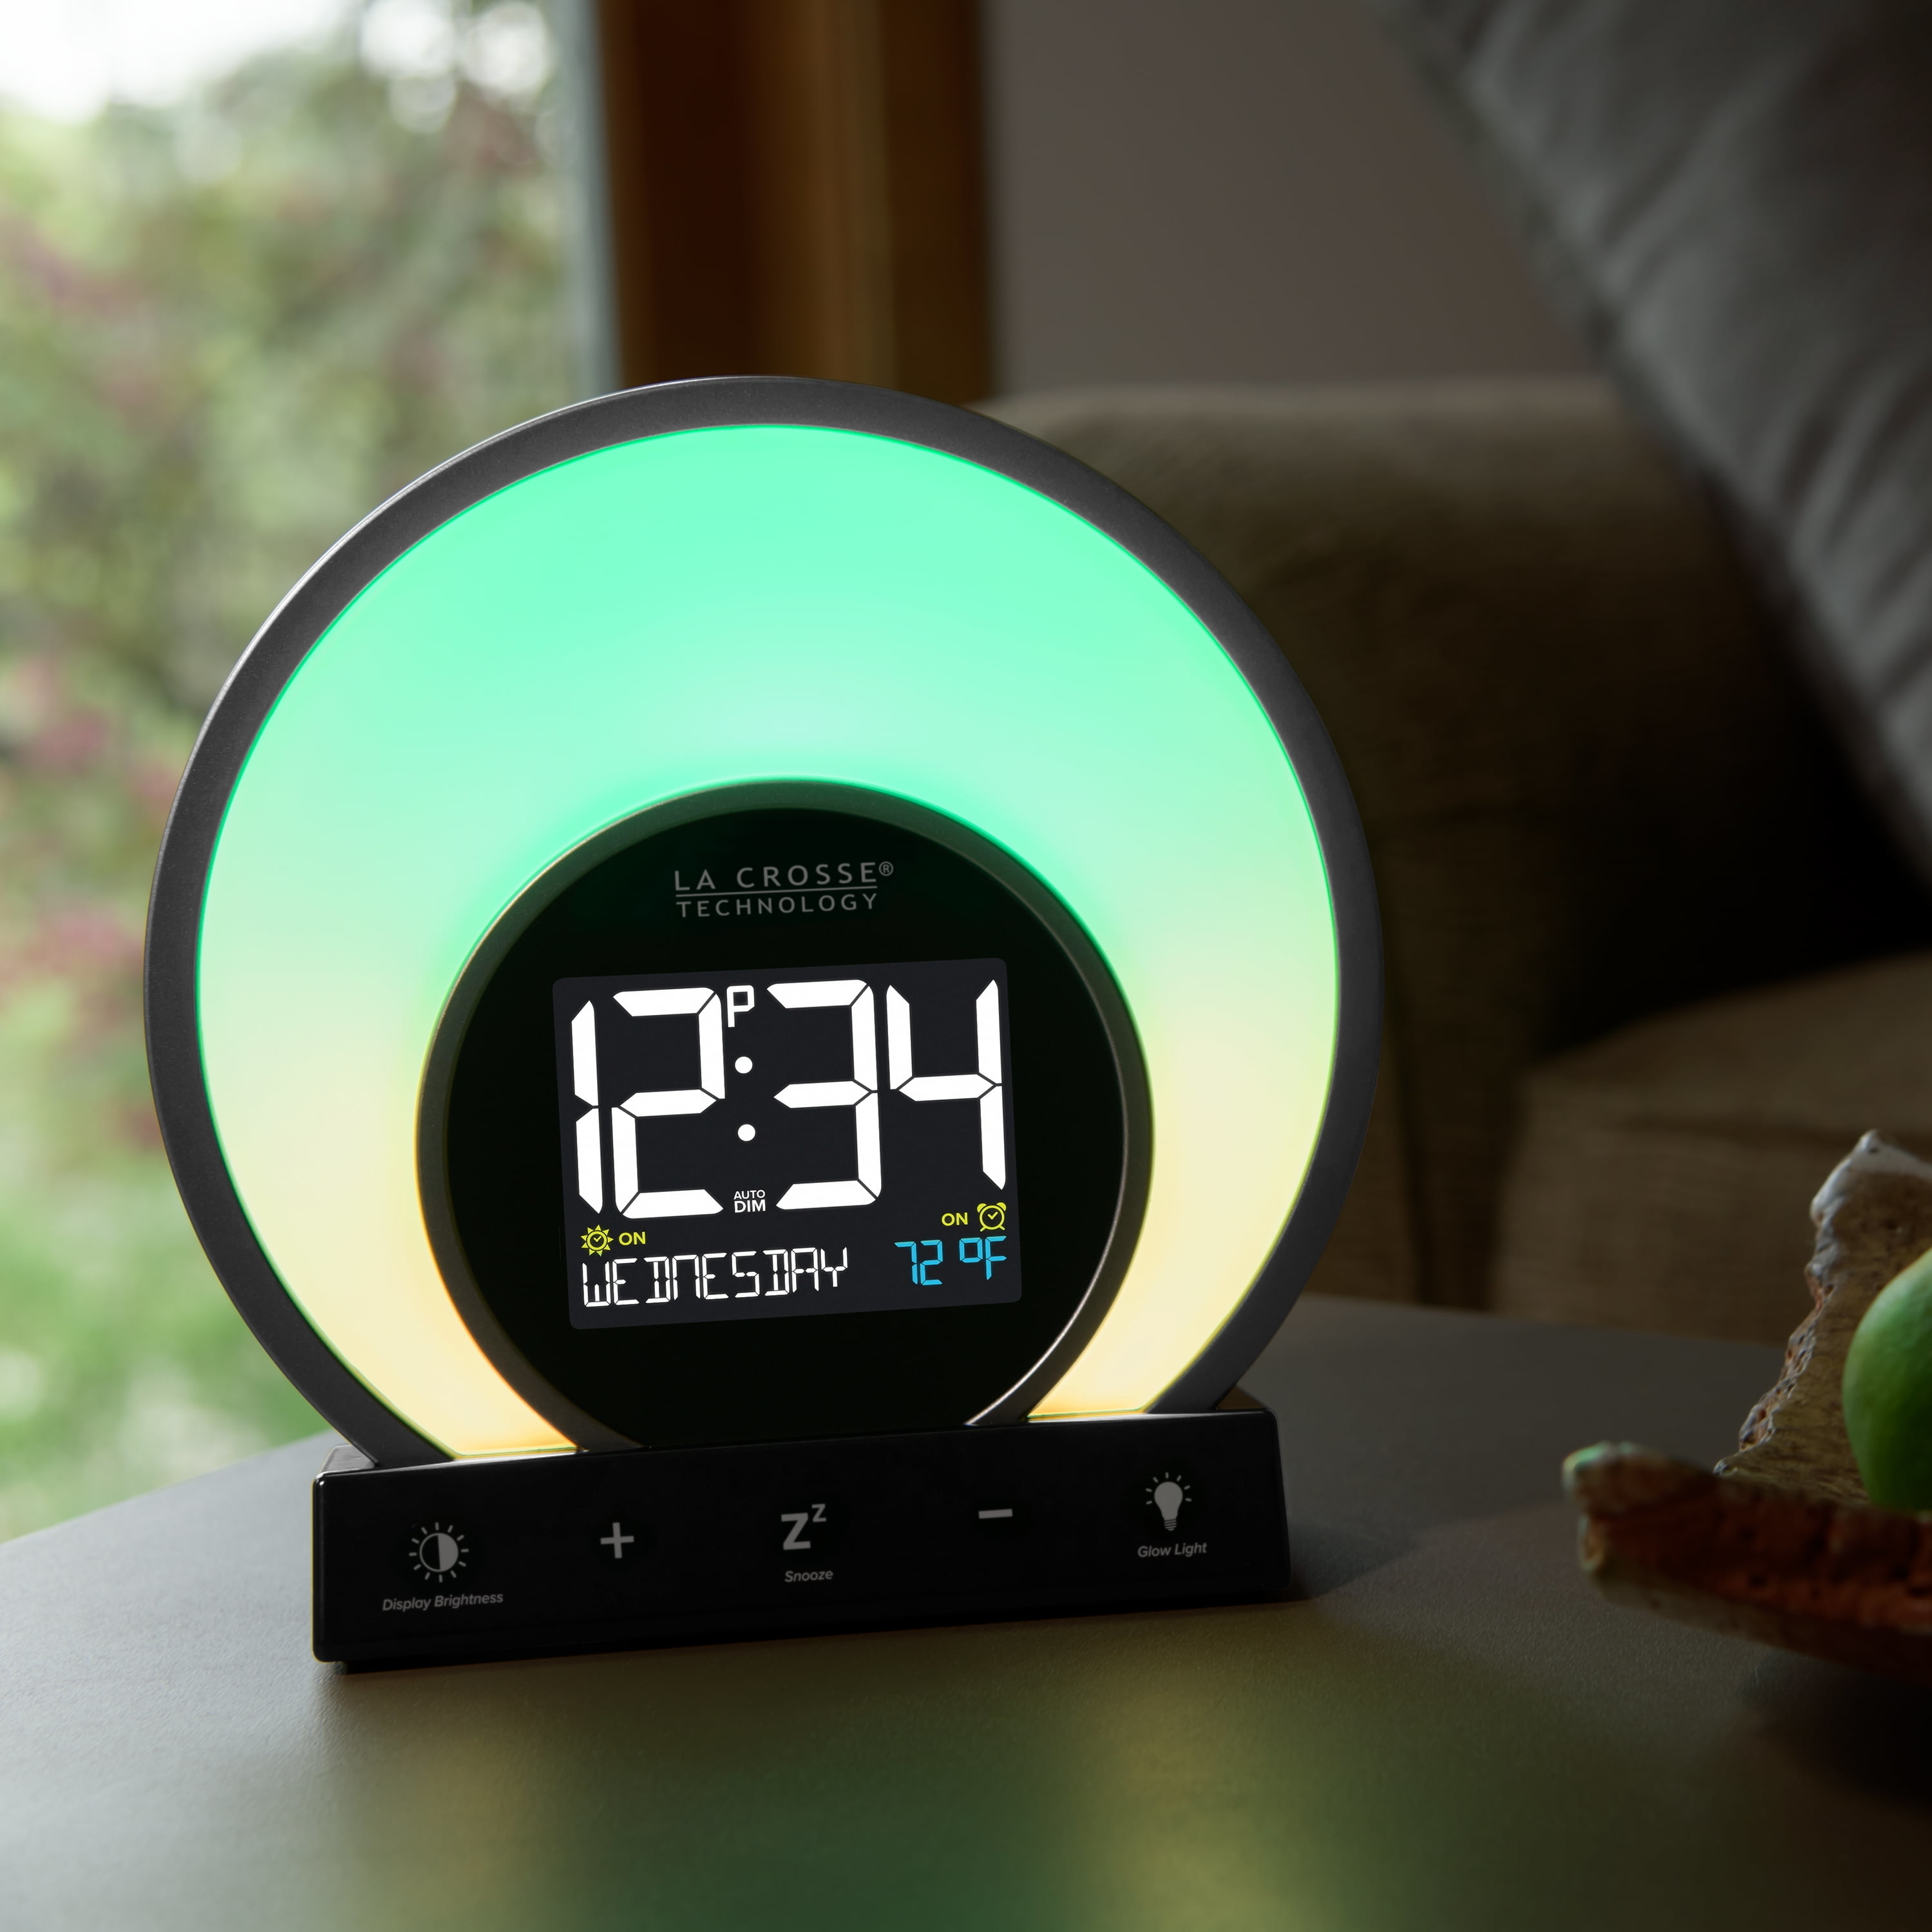 La Crosse Technology clock displaying time and temperature, with adjustable light ring placed on a table